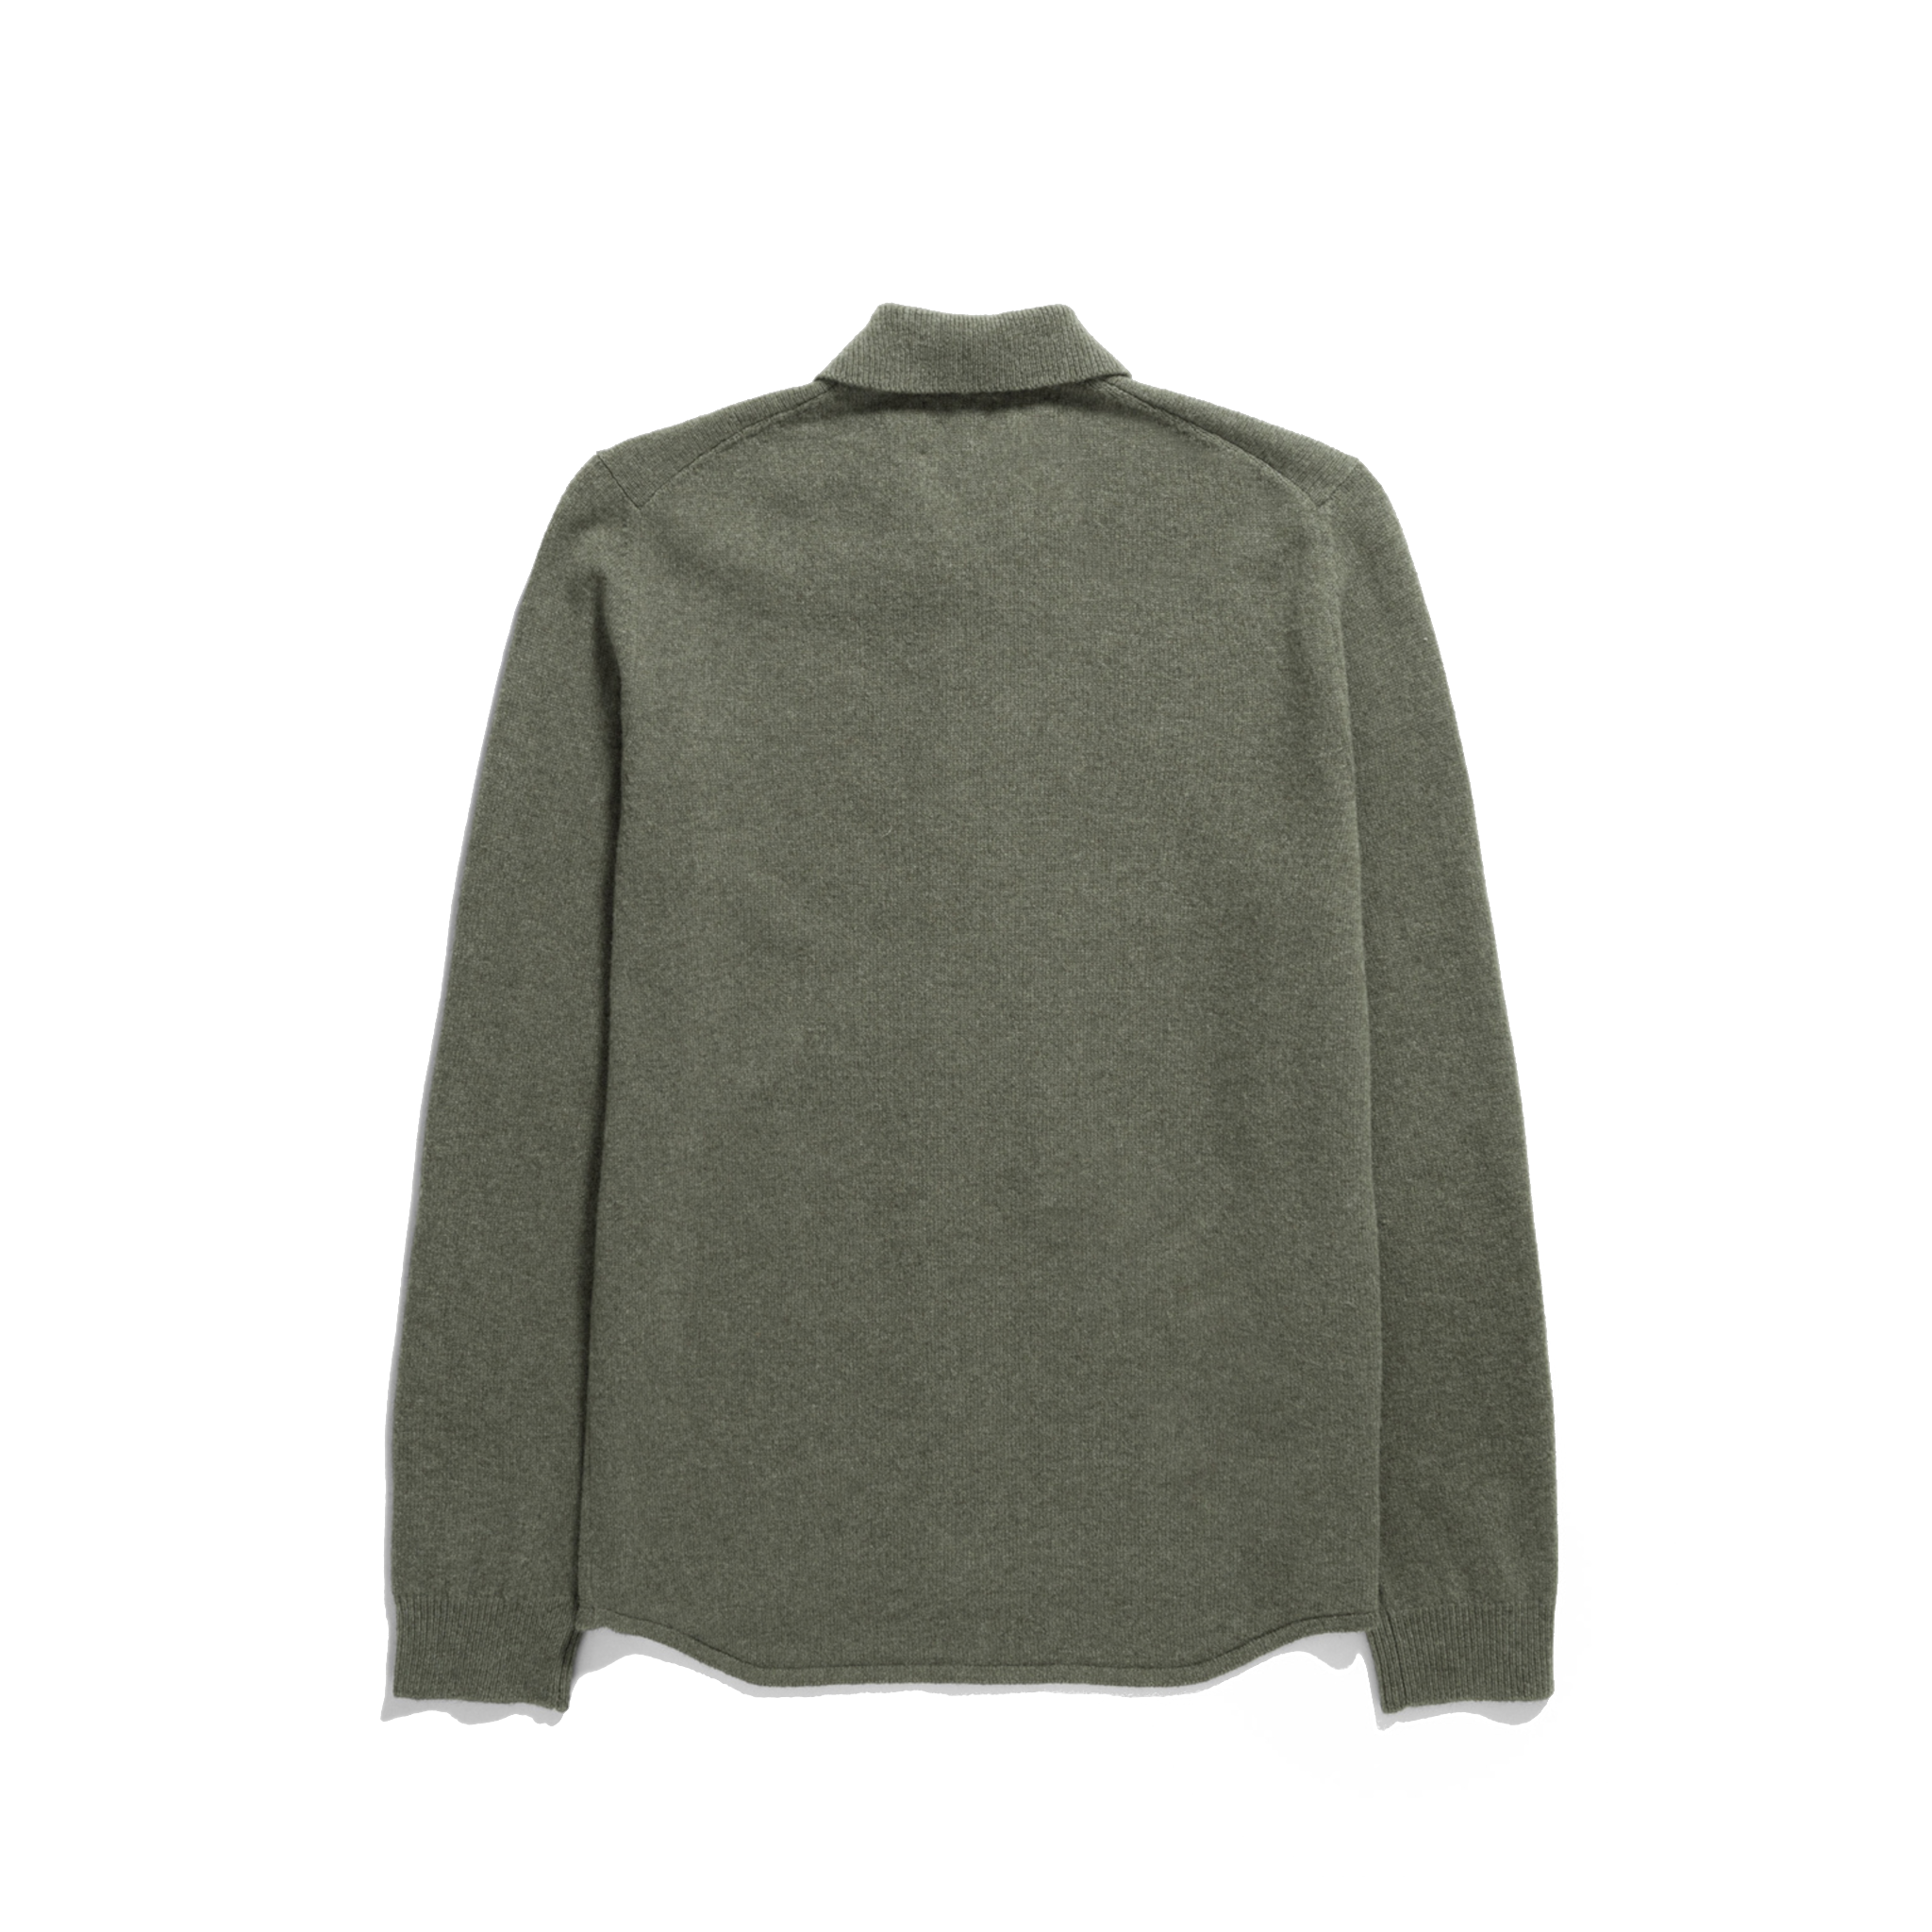 Martin Merino Lambswool Shirt - Ivy Green-Norse Projects-W2 Store